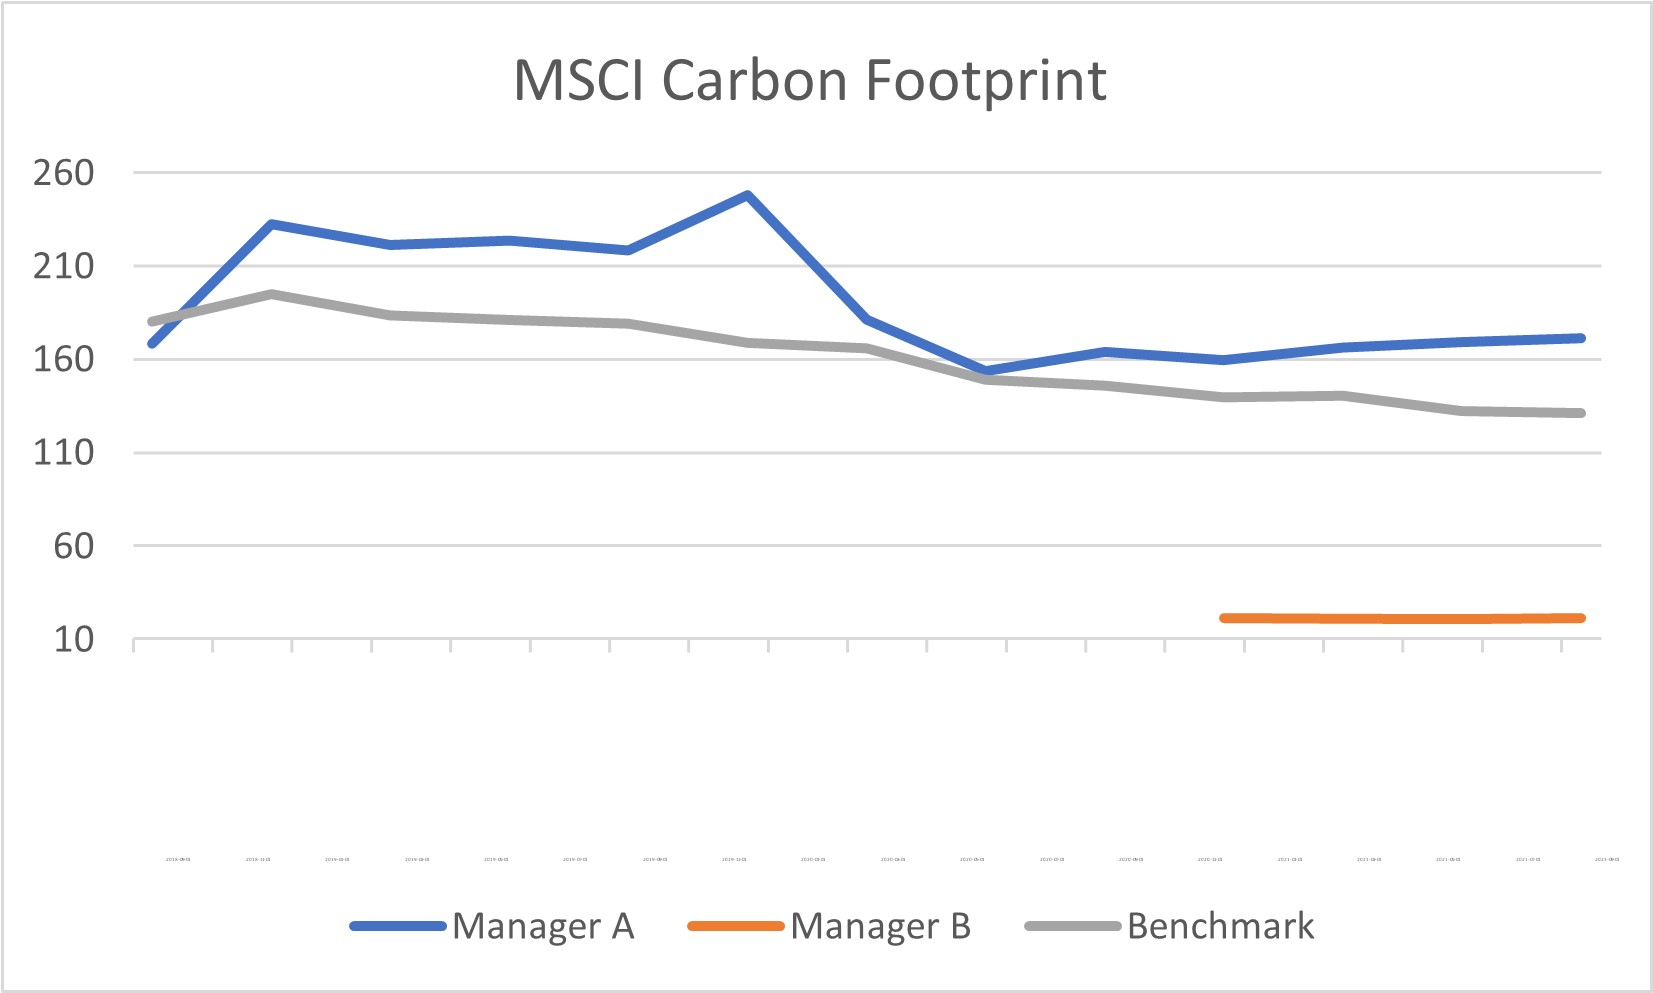 Example of two different managers' carbon footprints